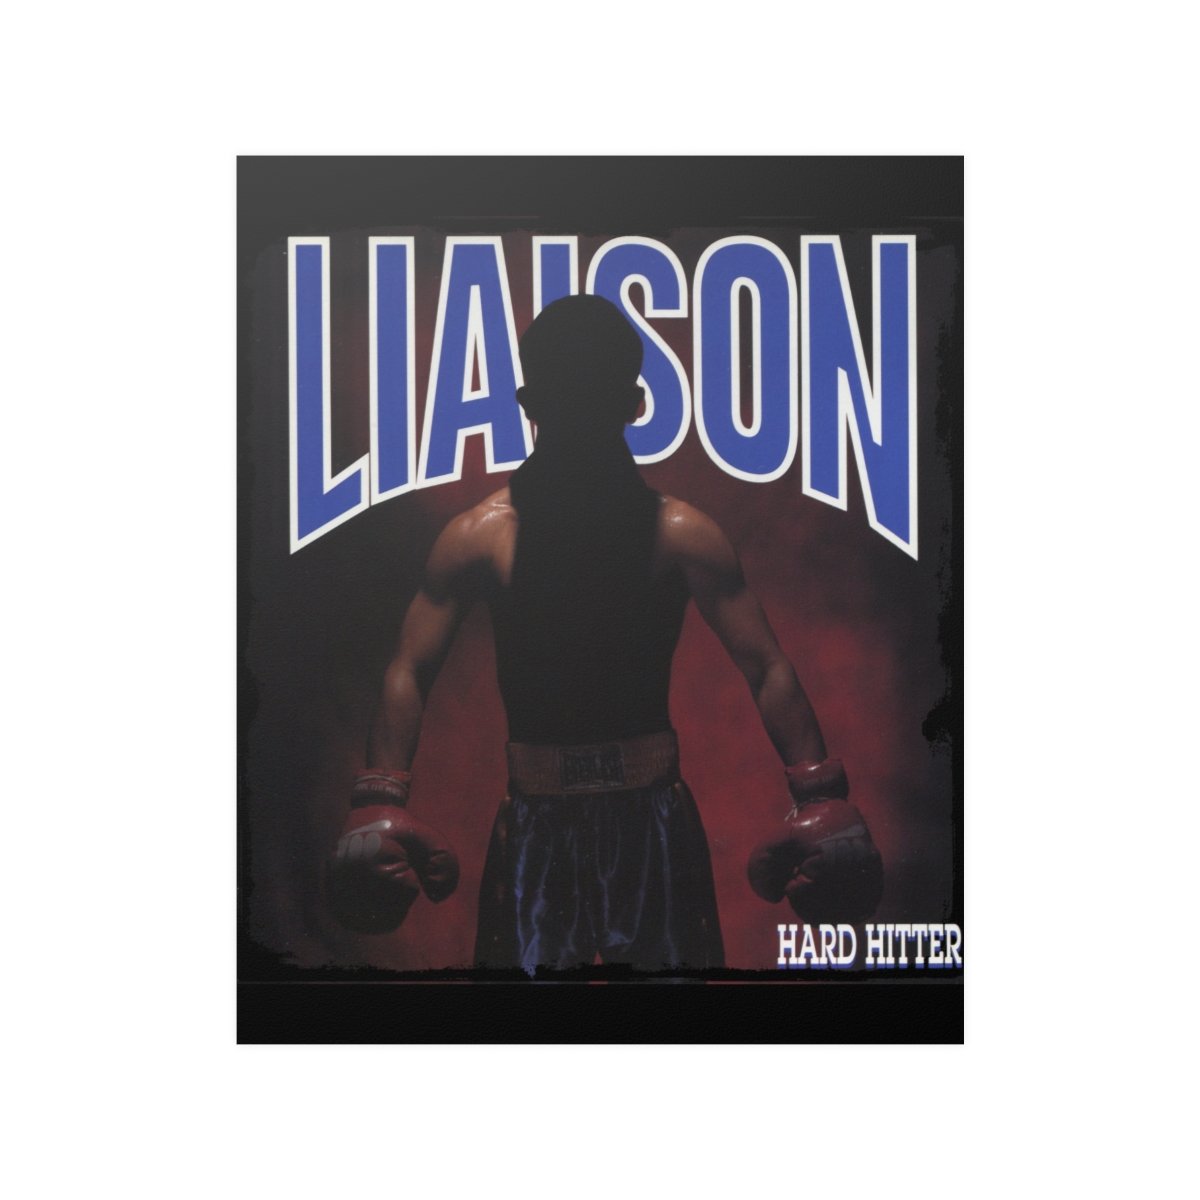 Liaison – Hard Hitter Posters